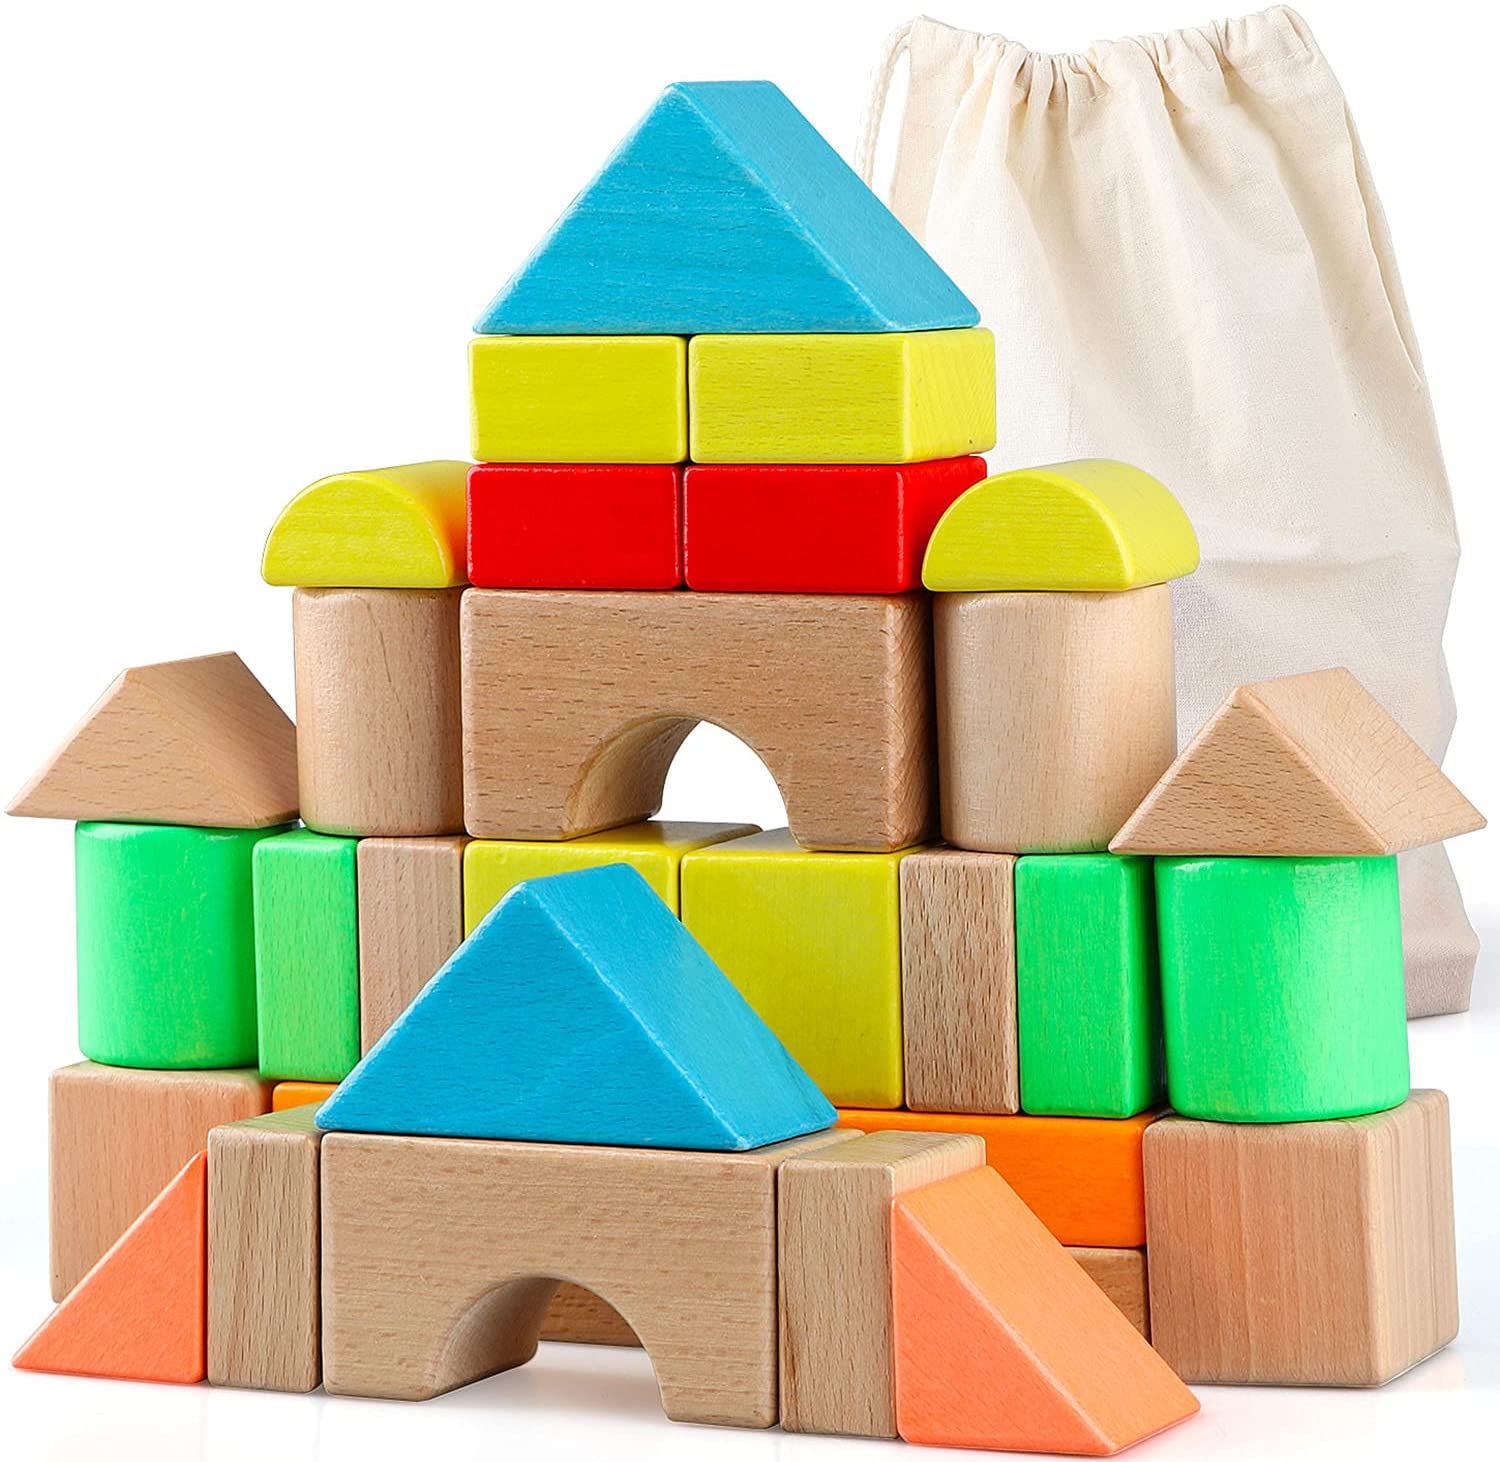 Gemileo Wooden Blocks Building Blocks for Toddlers Wood Large Construction Stacking Bricks Blocks Board 32 Pieces Educational Learning Toys Games for Kids Boys Girls 